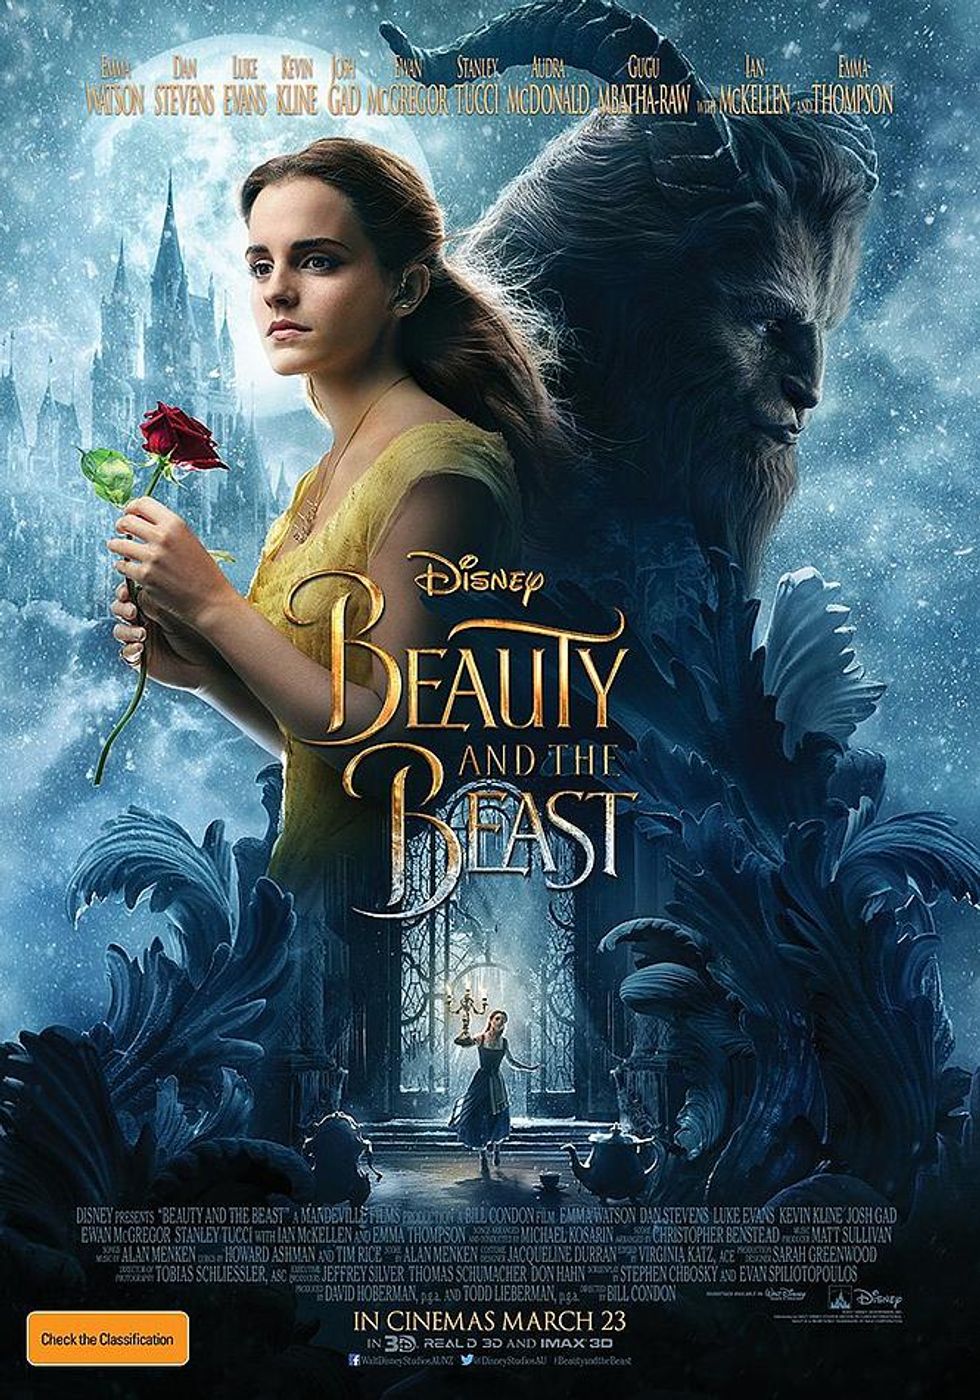 Why Critics Are Crazy To Criticize "Beauty and The Beast"